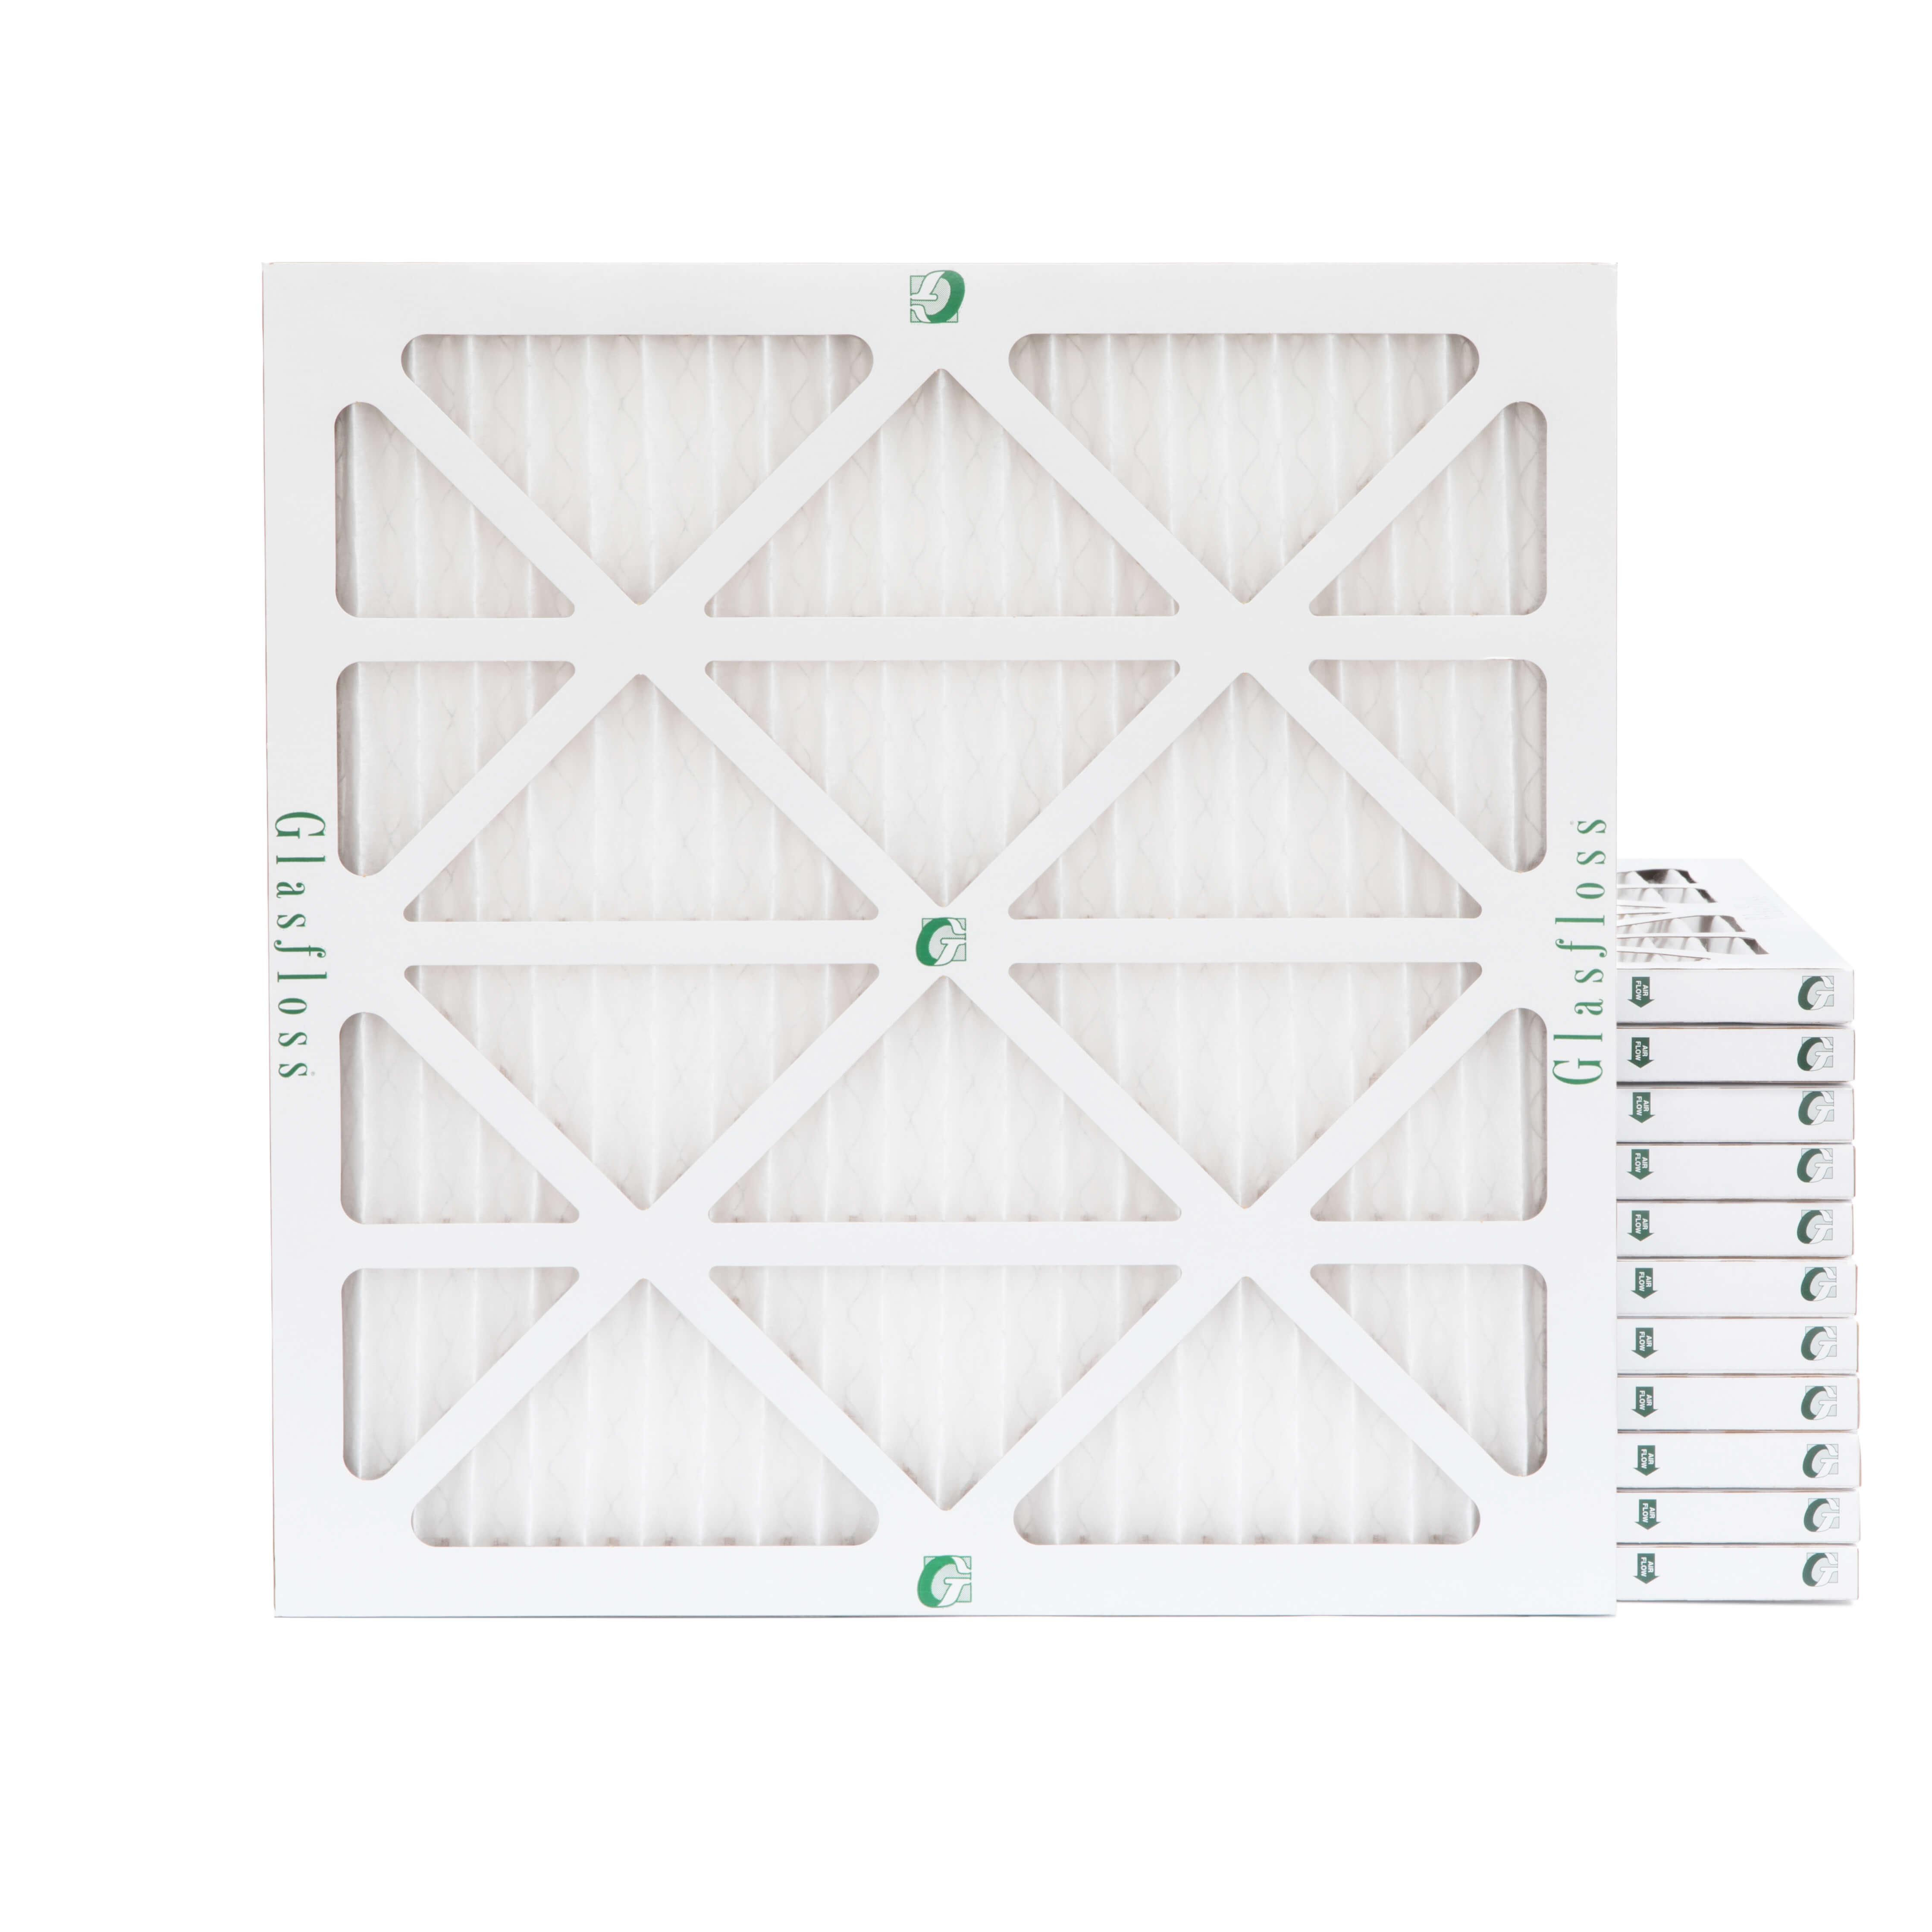 GLASFLOSS 20X22X1 MERV 10 AC & Furnace Air Filters. Case Of 12. Actual Size: 19-1/2 X 21-7/8 X 7/8